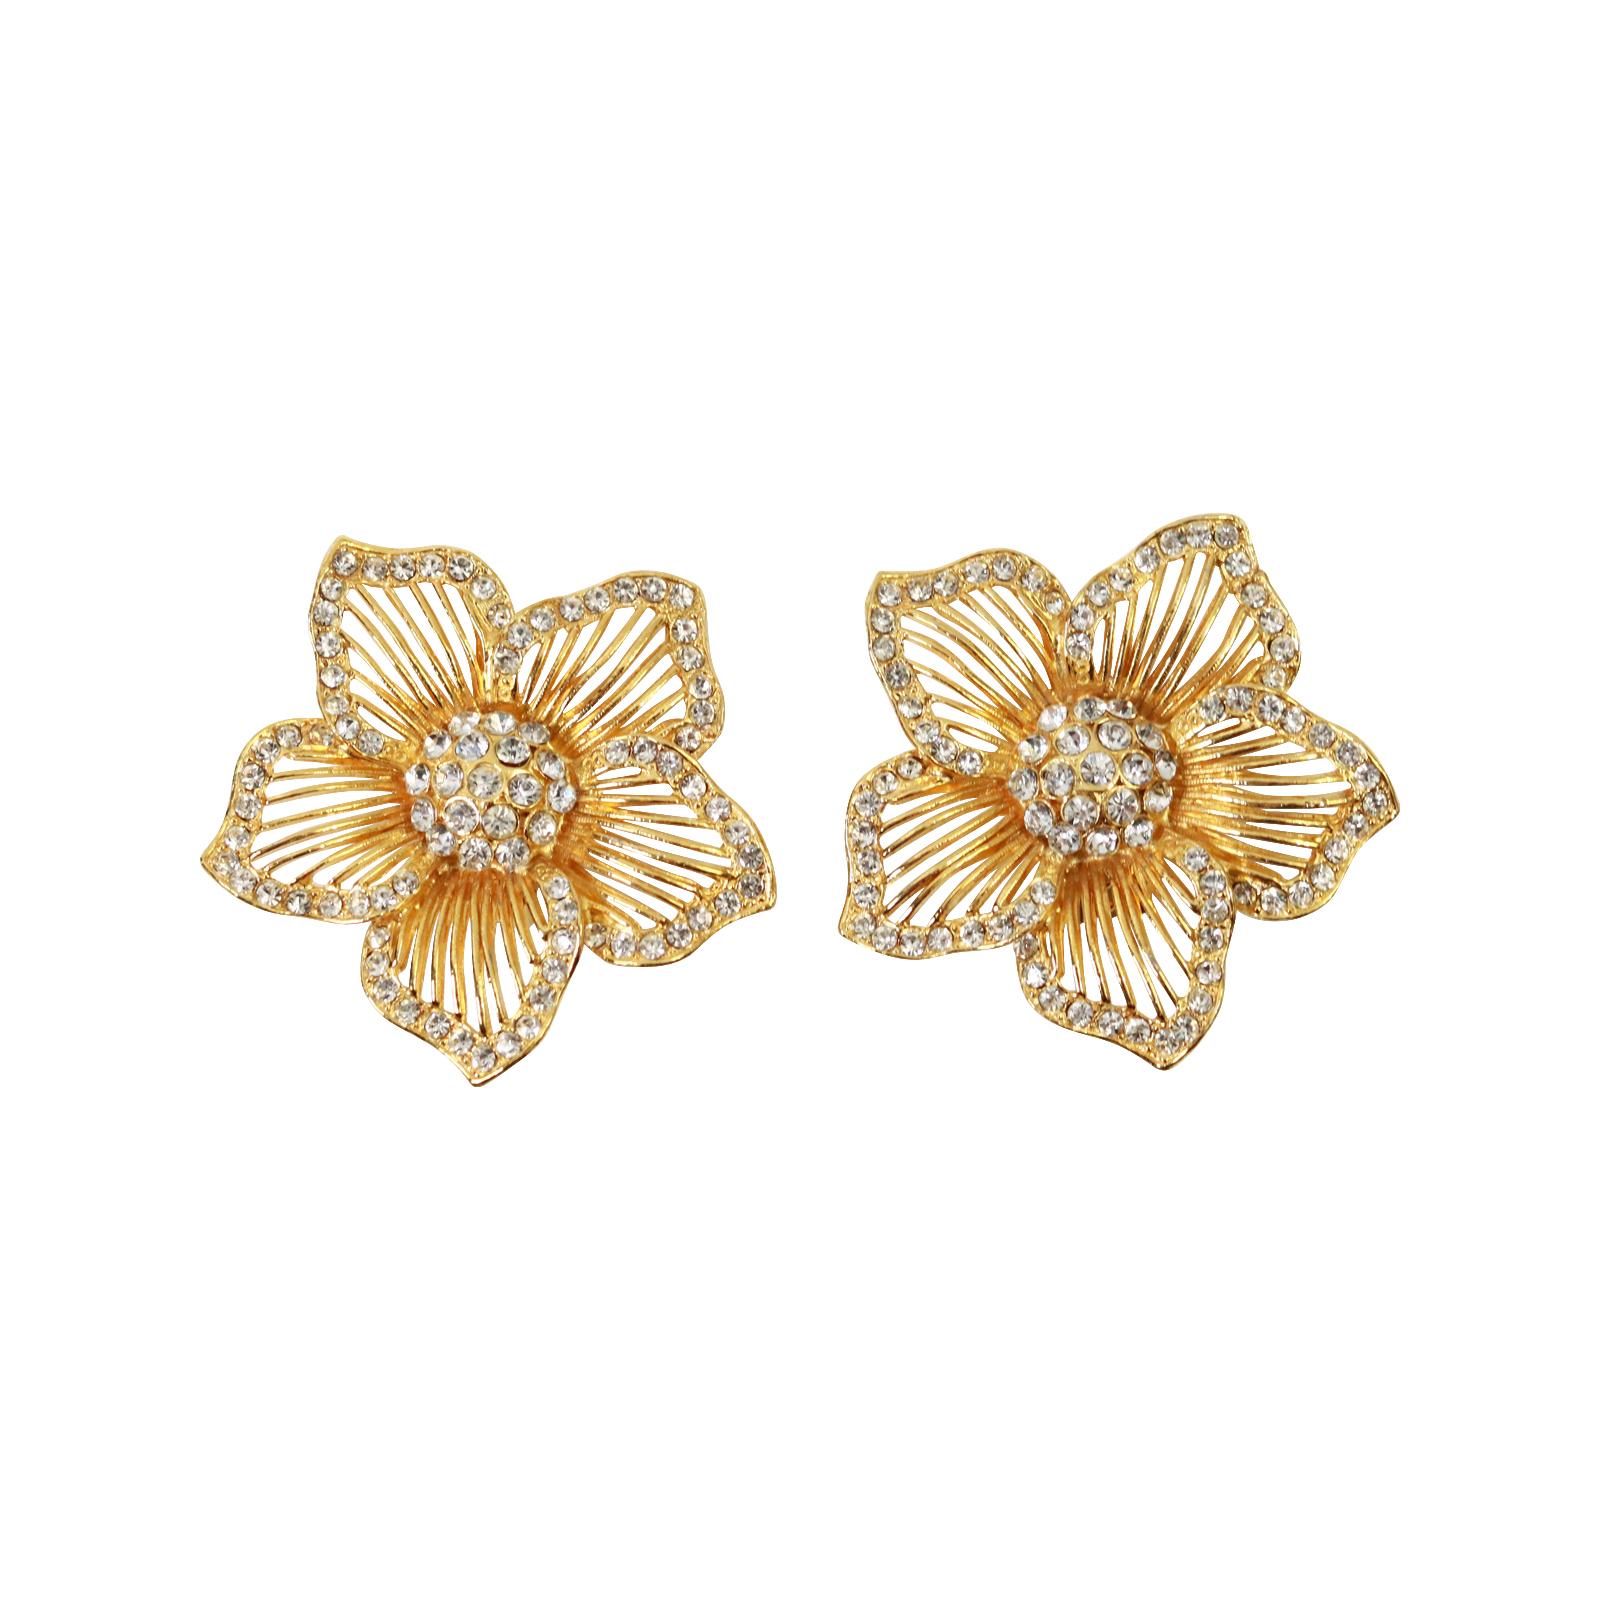 Vintage Gold Tone and Diamante Flower Earrings, Circa 1980's. These are well made and substantial earrings The earrings have a surround of the diamante and the center is a mound of pave. All the petals are open and created by pieces of open wire. 